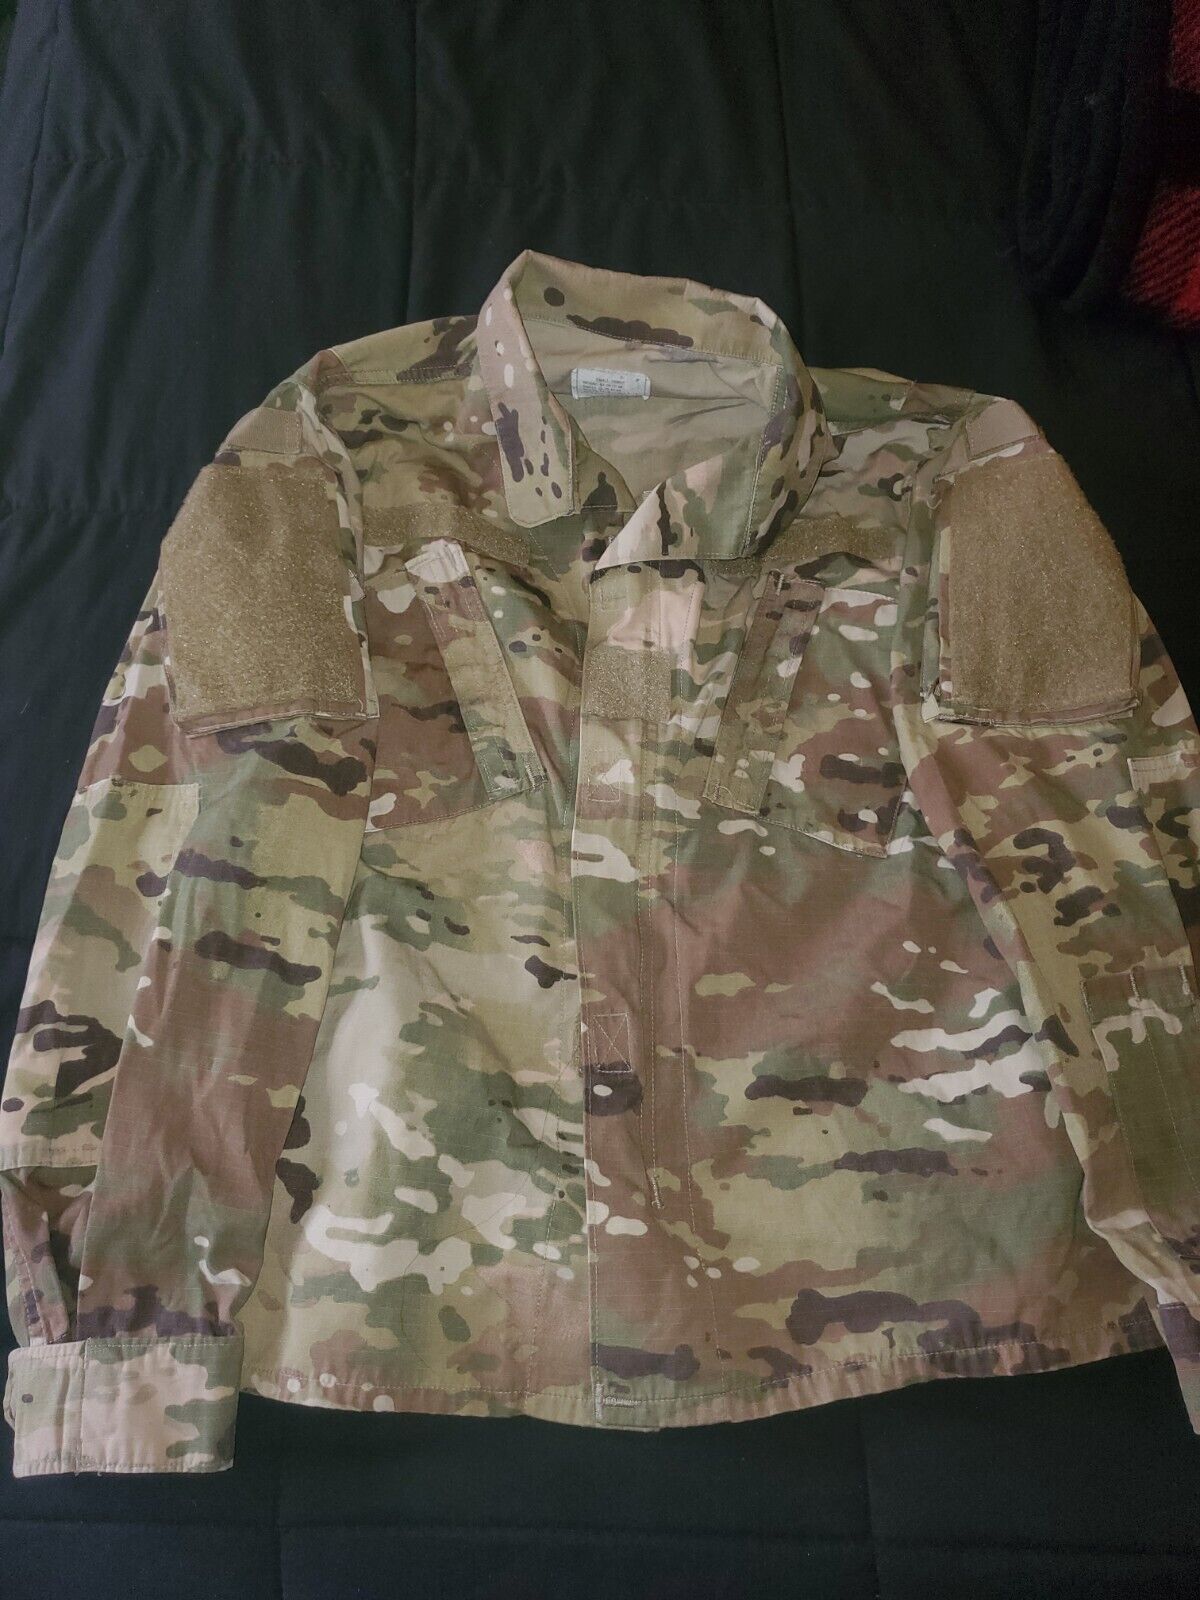 Current issue US Army OCP Camo bdu shirt, SMALL-SHORT